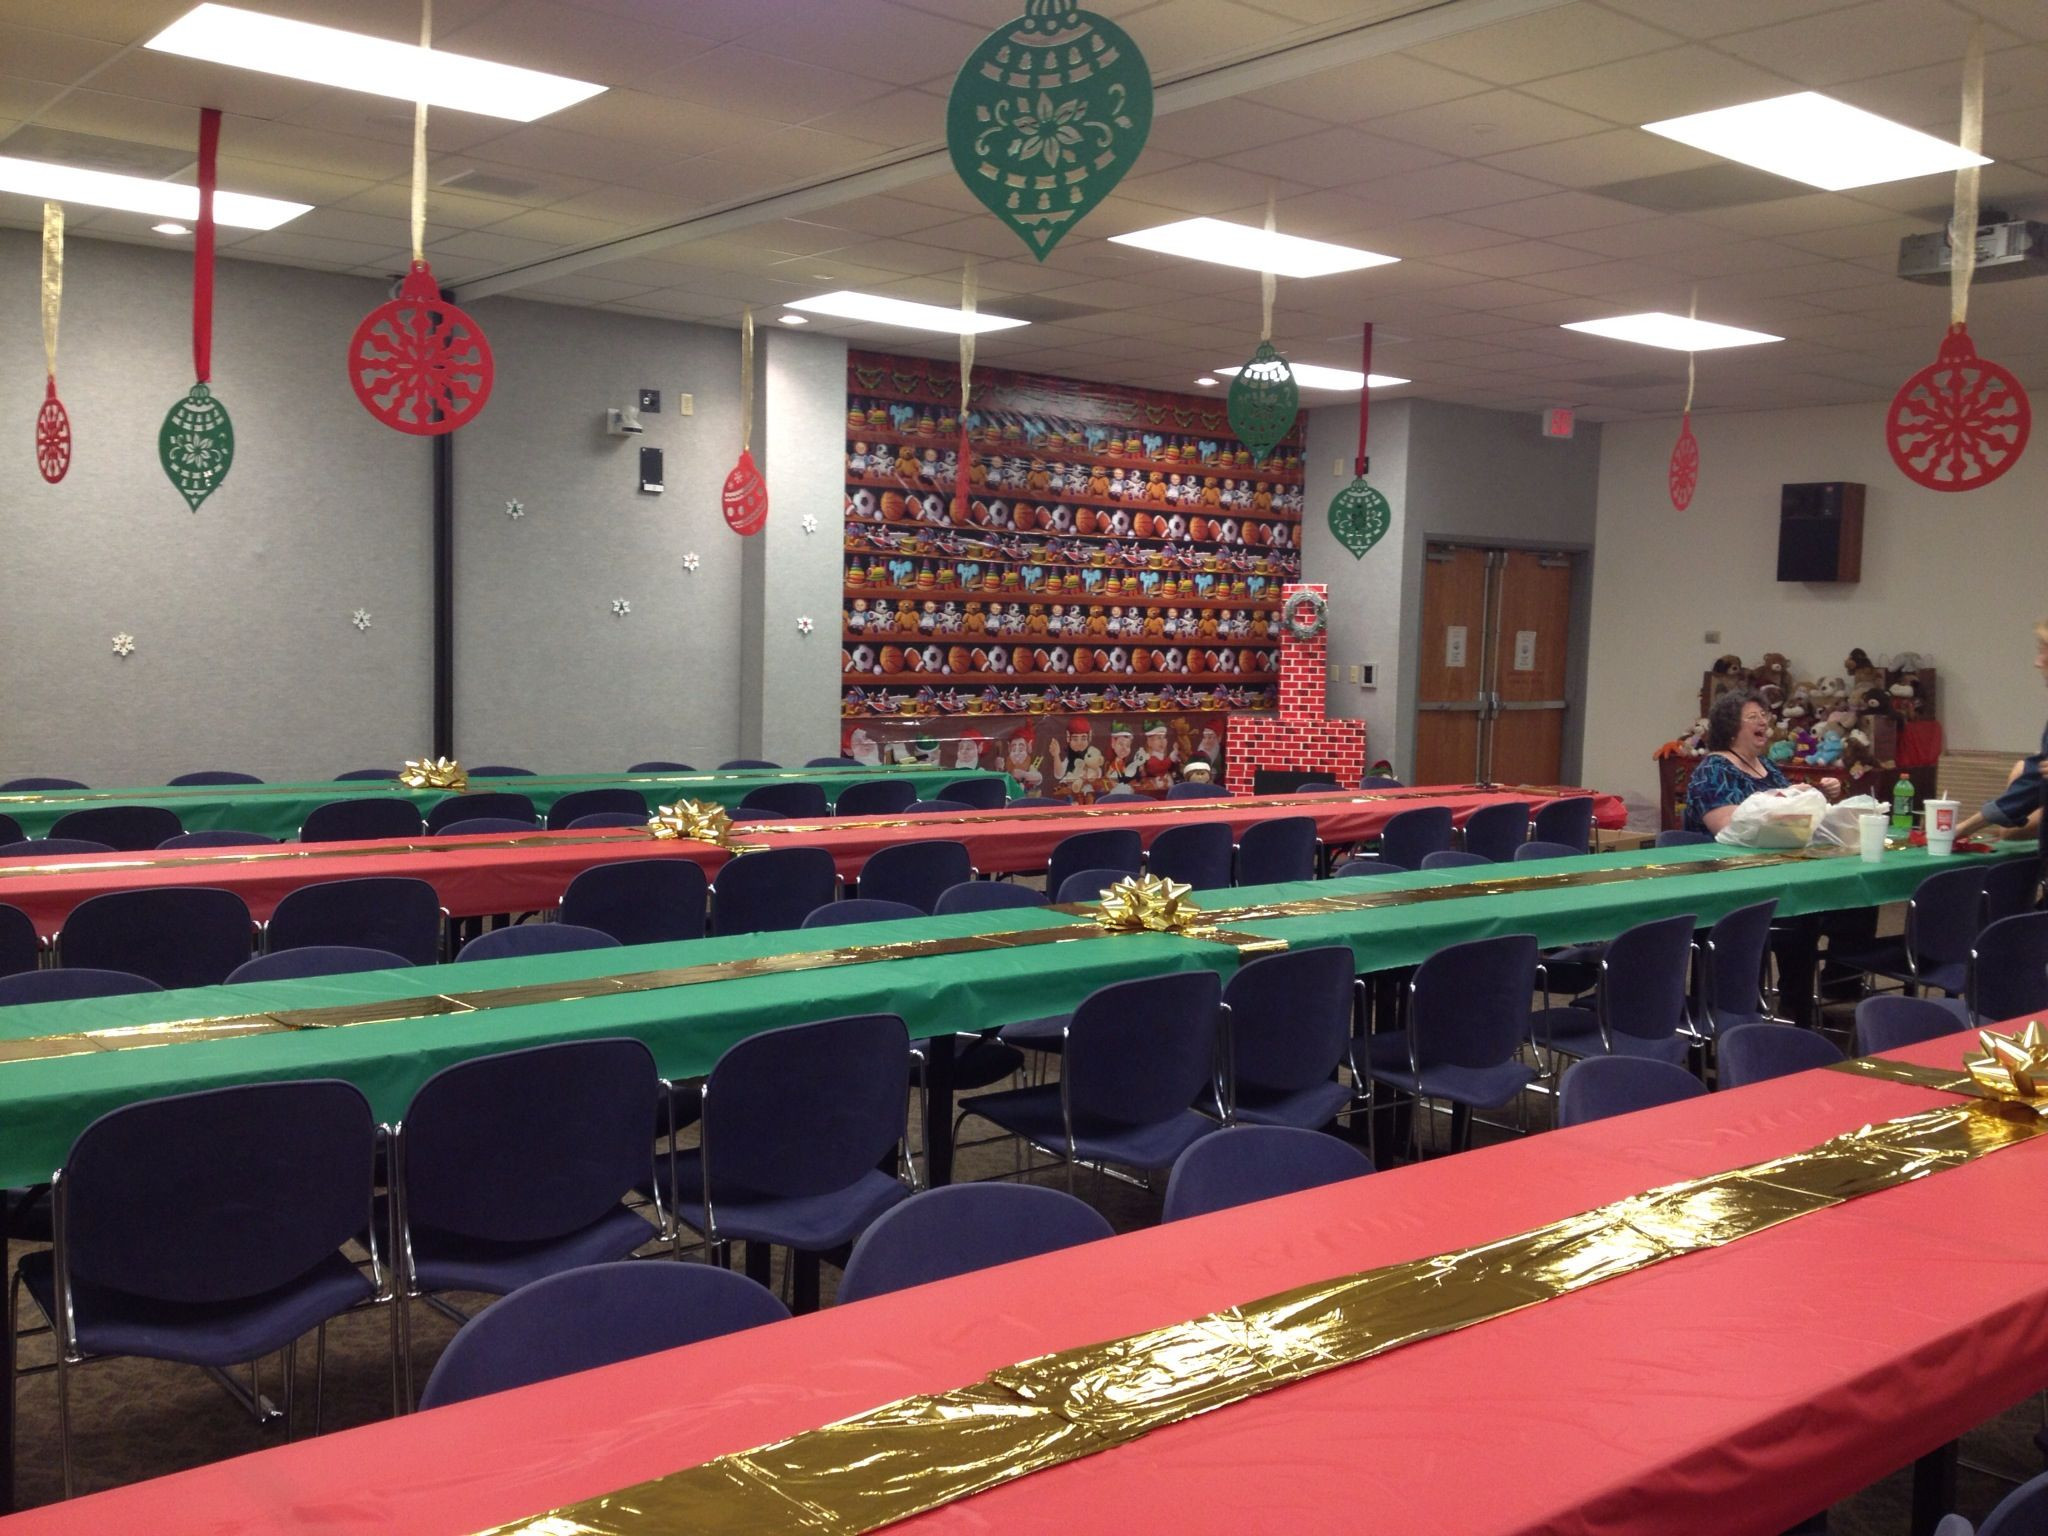 Christmas Office Party Ideas
 fice Christmas party decorations Holidays